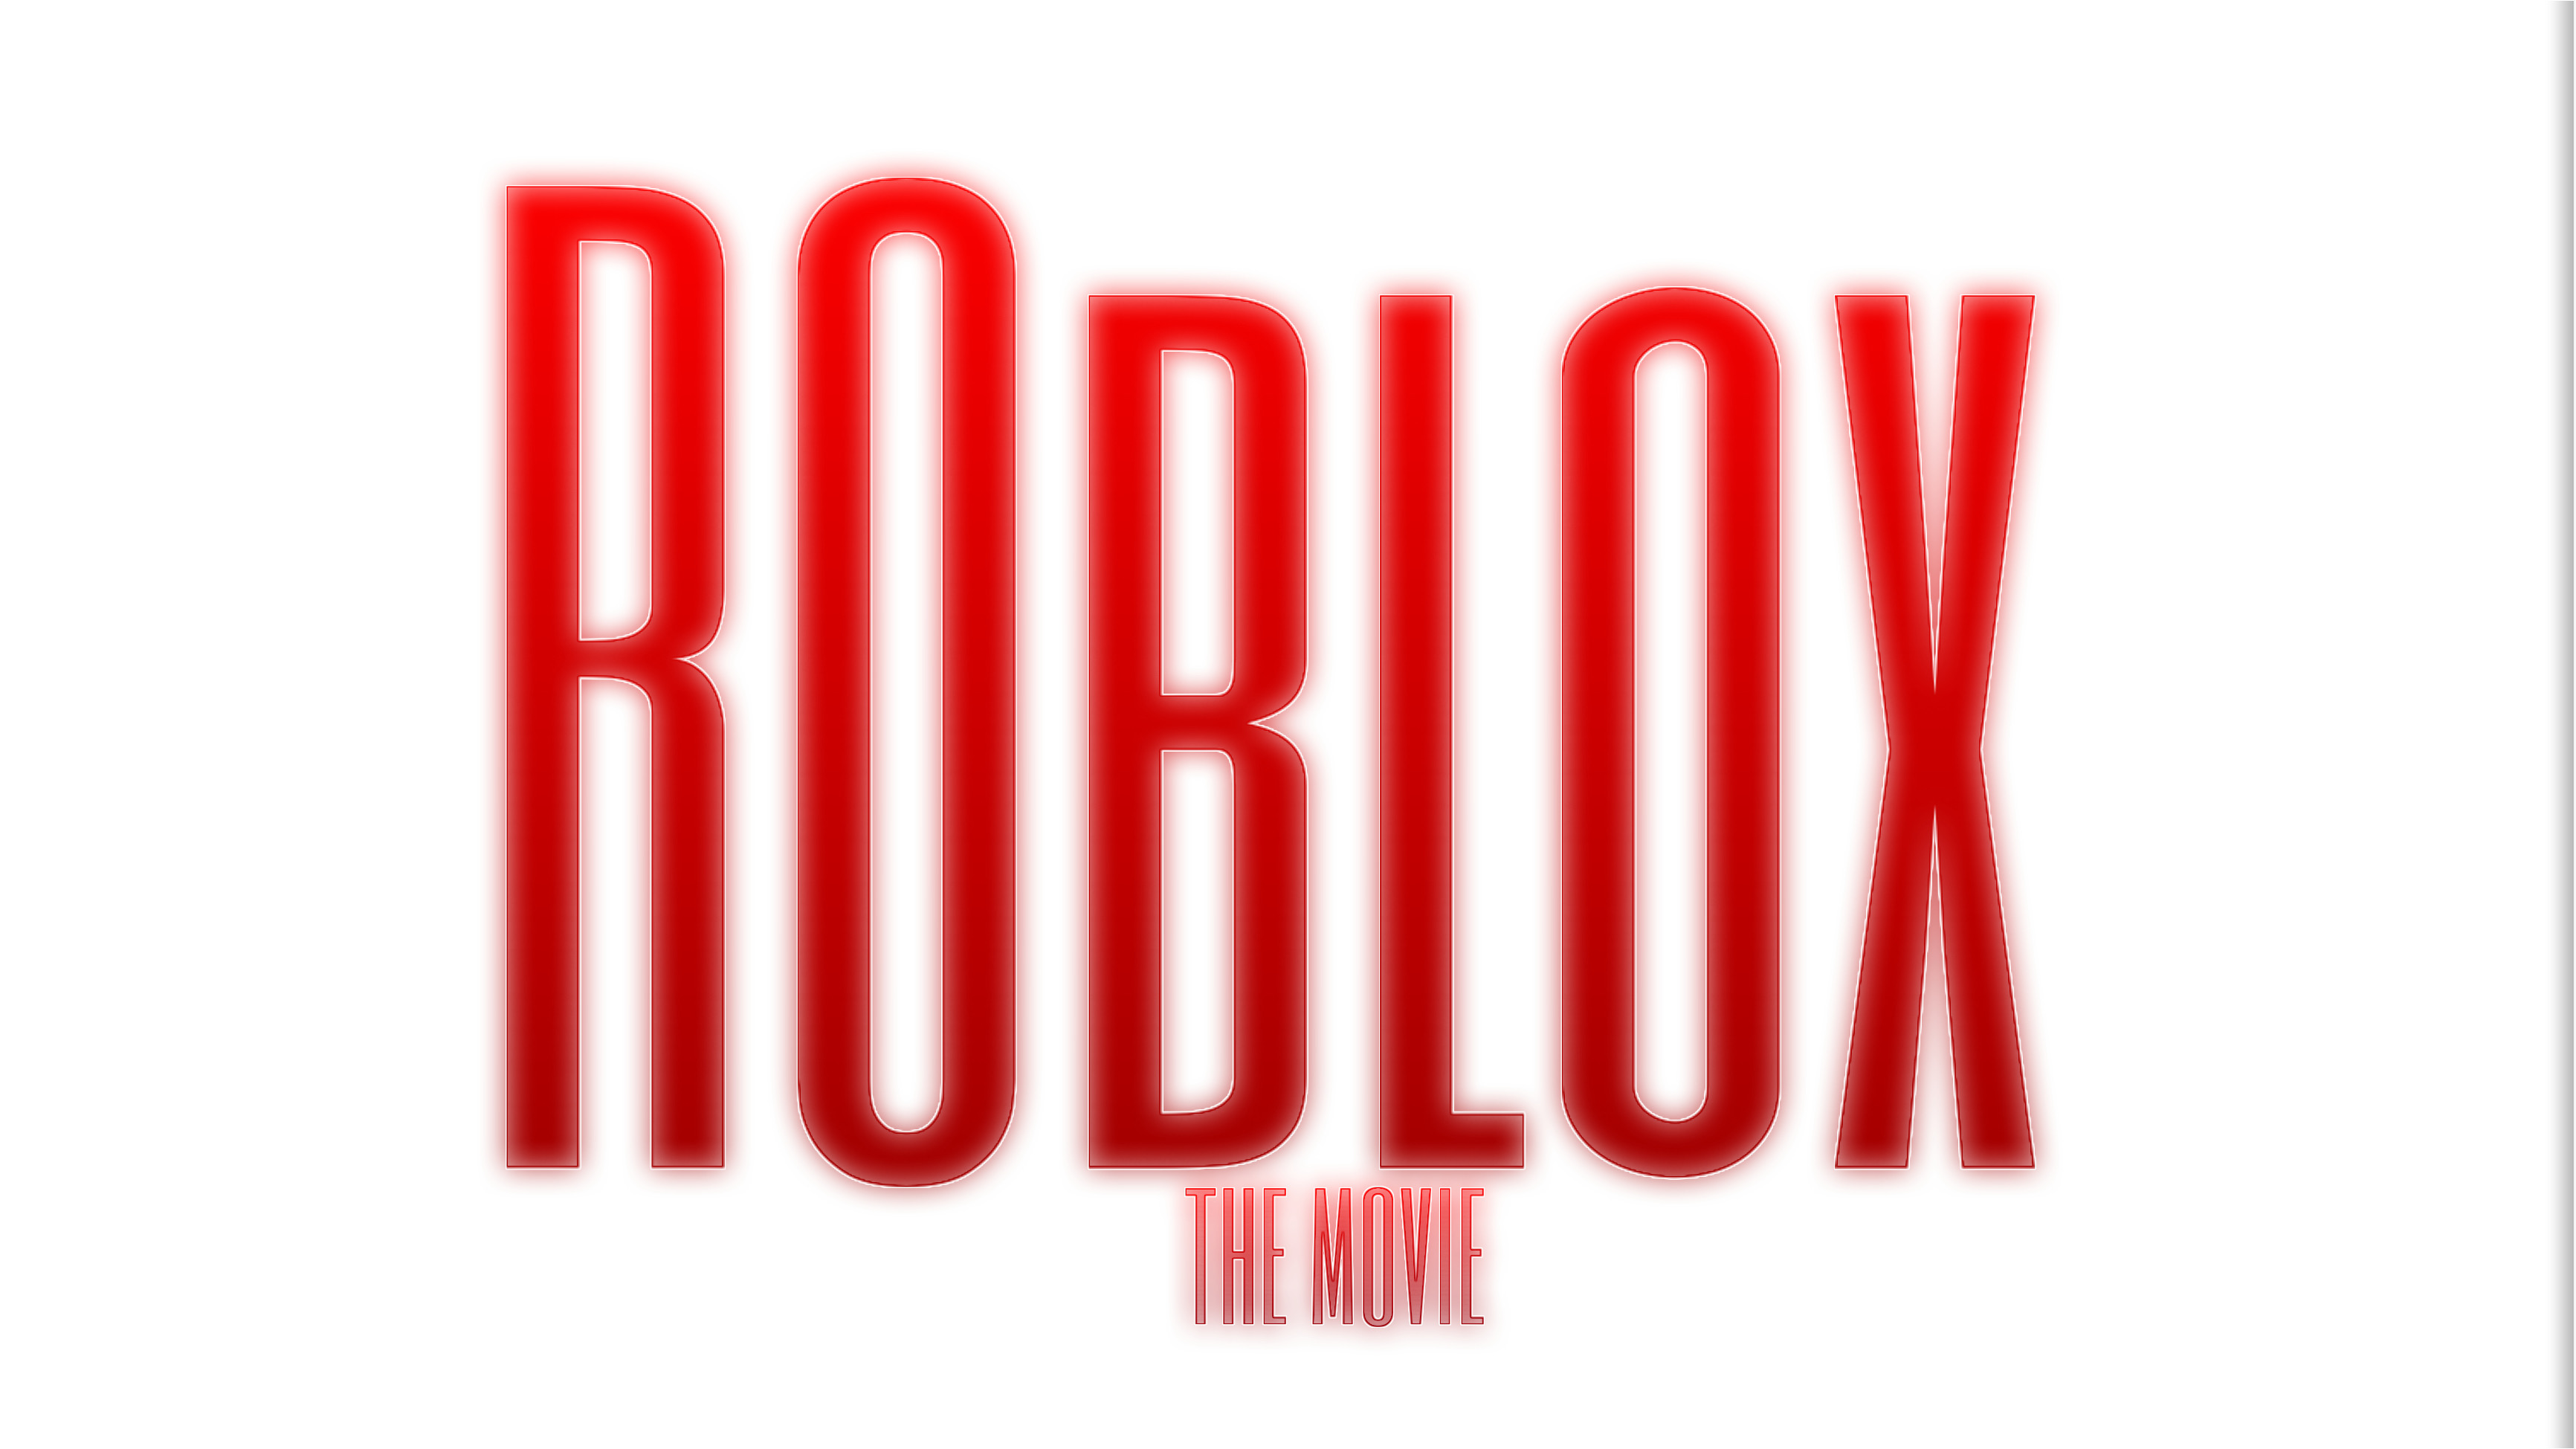 Roblox Is Here Roblox The Movie Image By Yuri Clark - roblox movies about